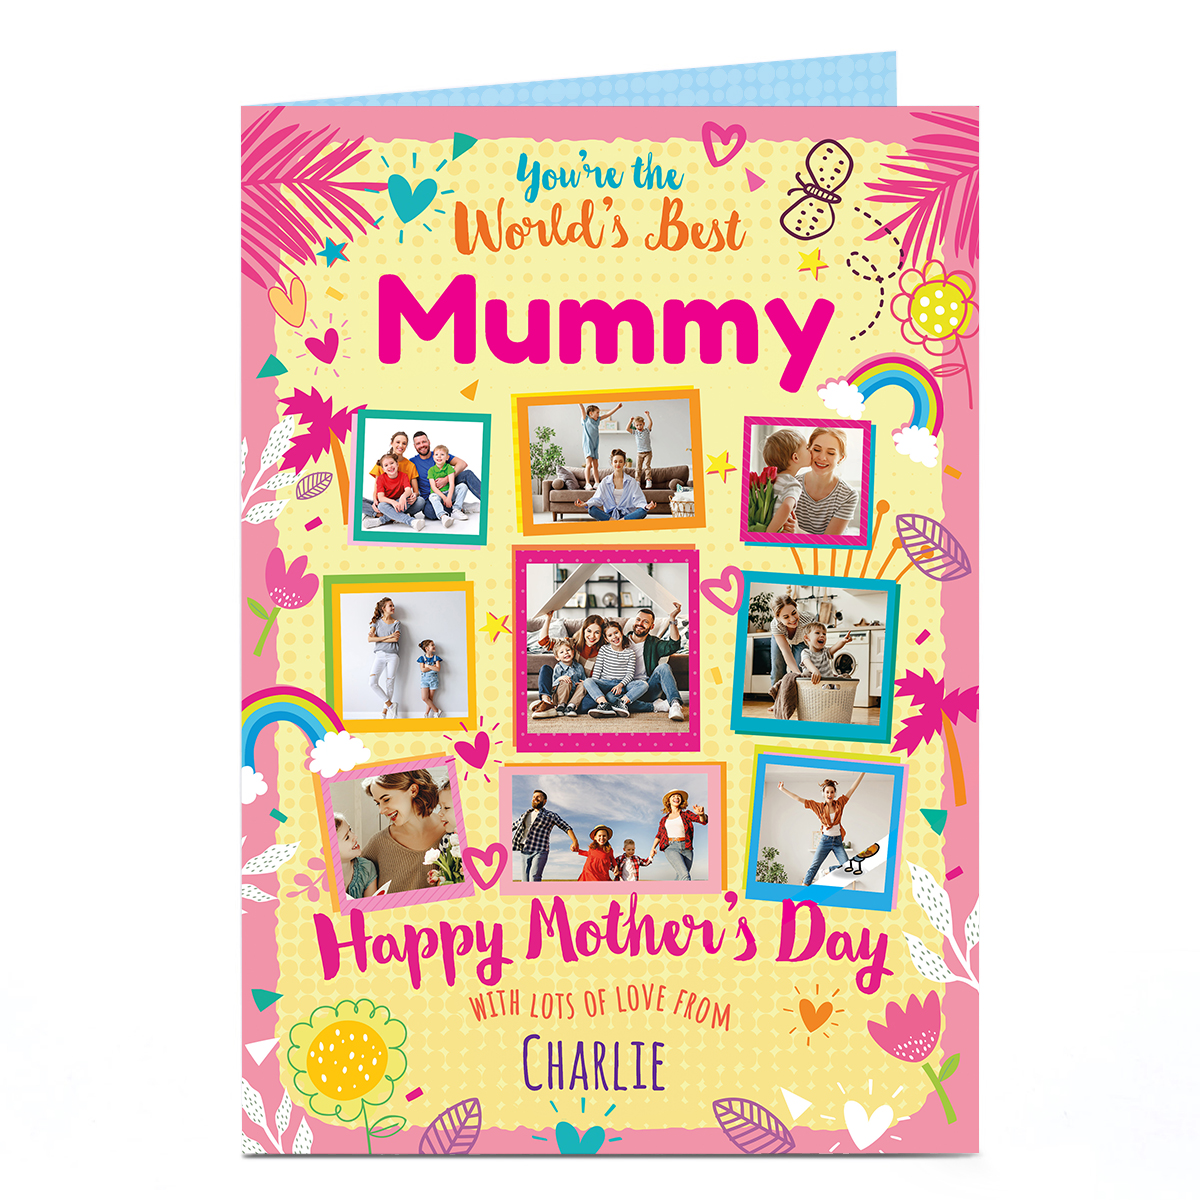  Personalised Mother's Day Photo Card - The World's Best Mummy